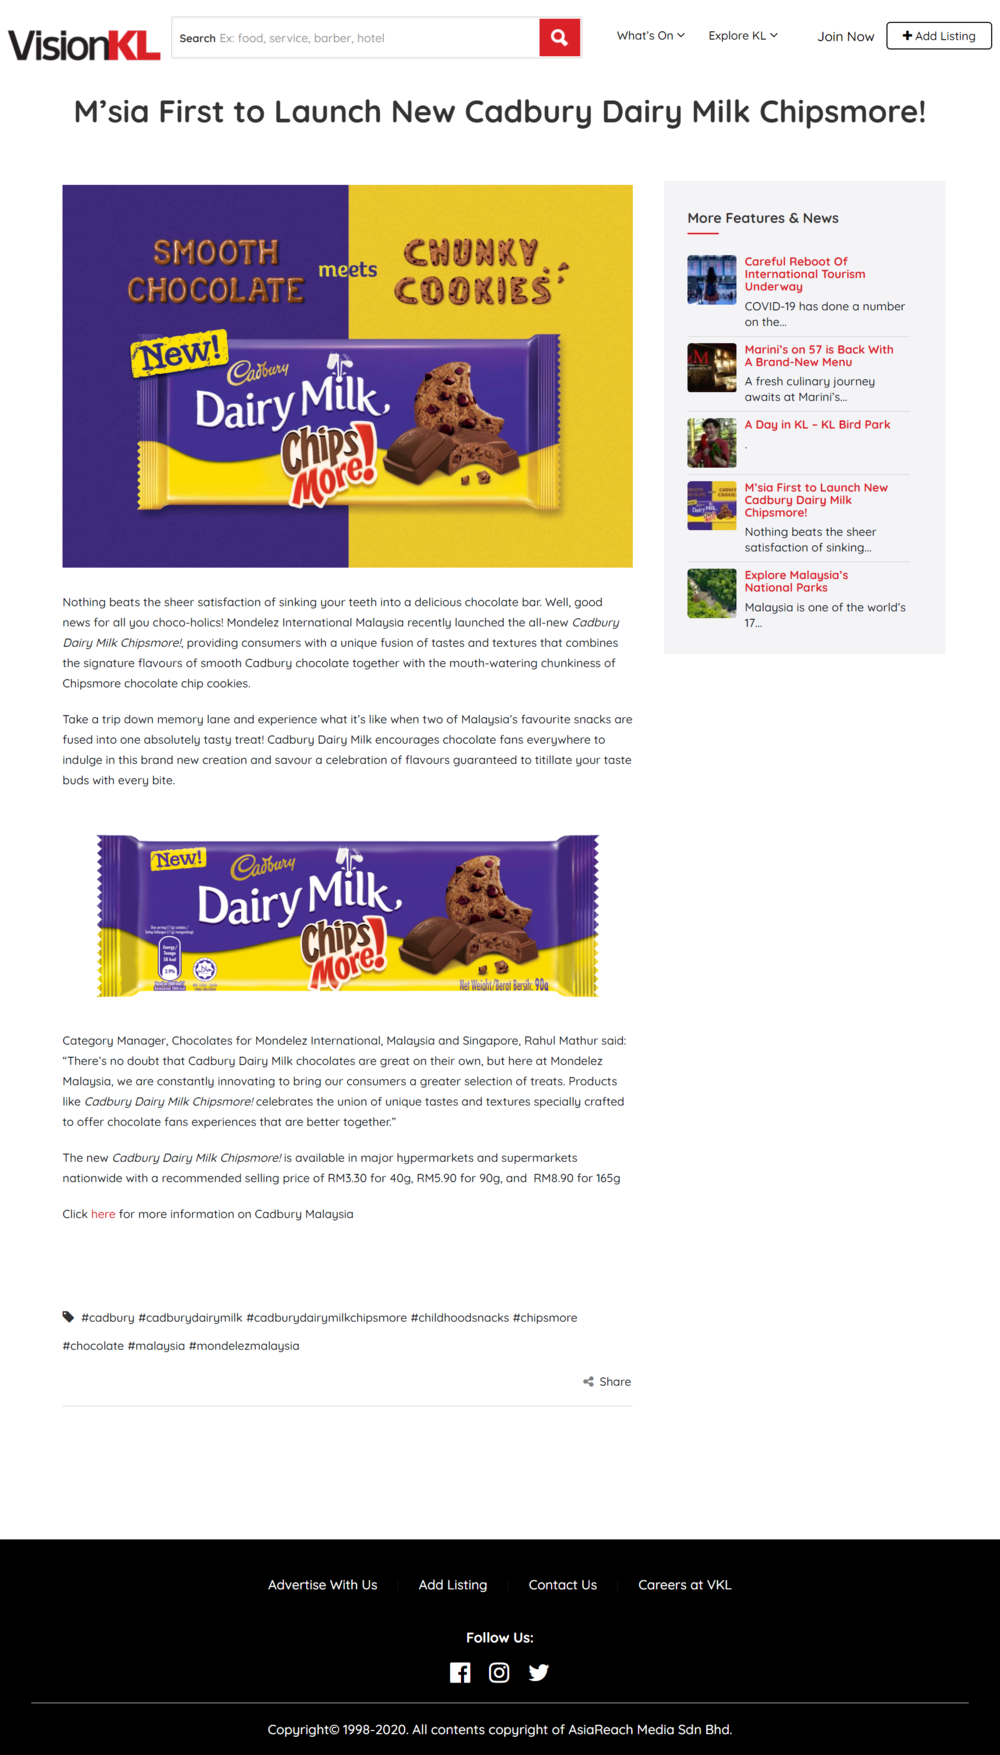 visionkl-msia-first-to-launch-new-cadbury-dairy-milk-chipsmore-2020-06-26-09_31_46.png